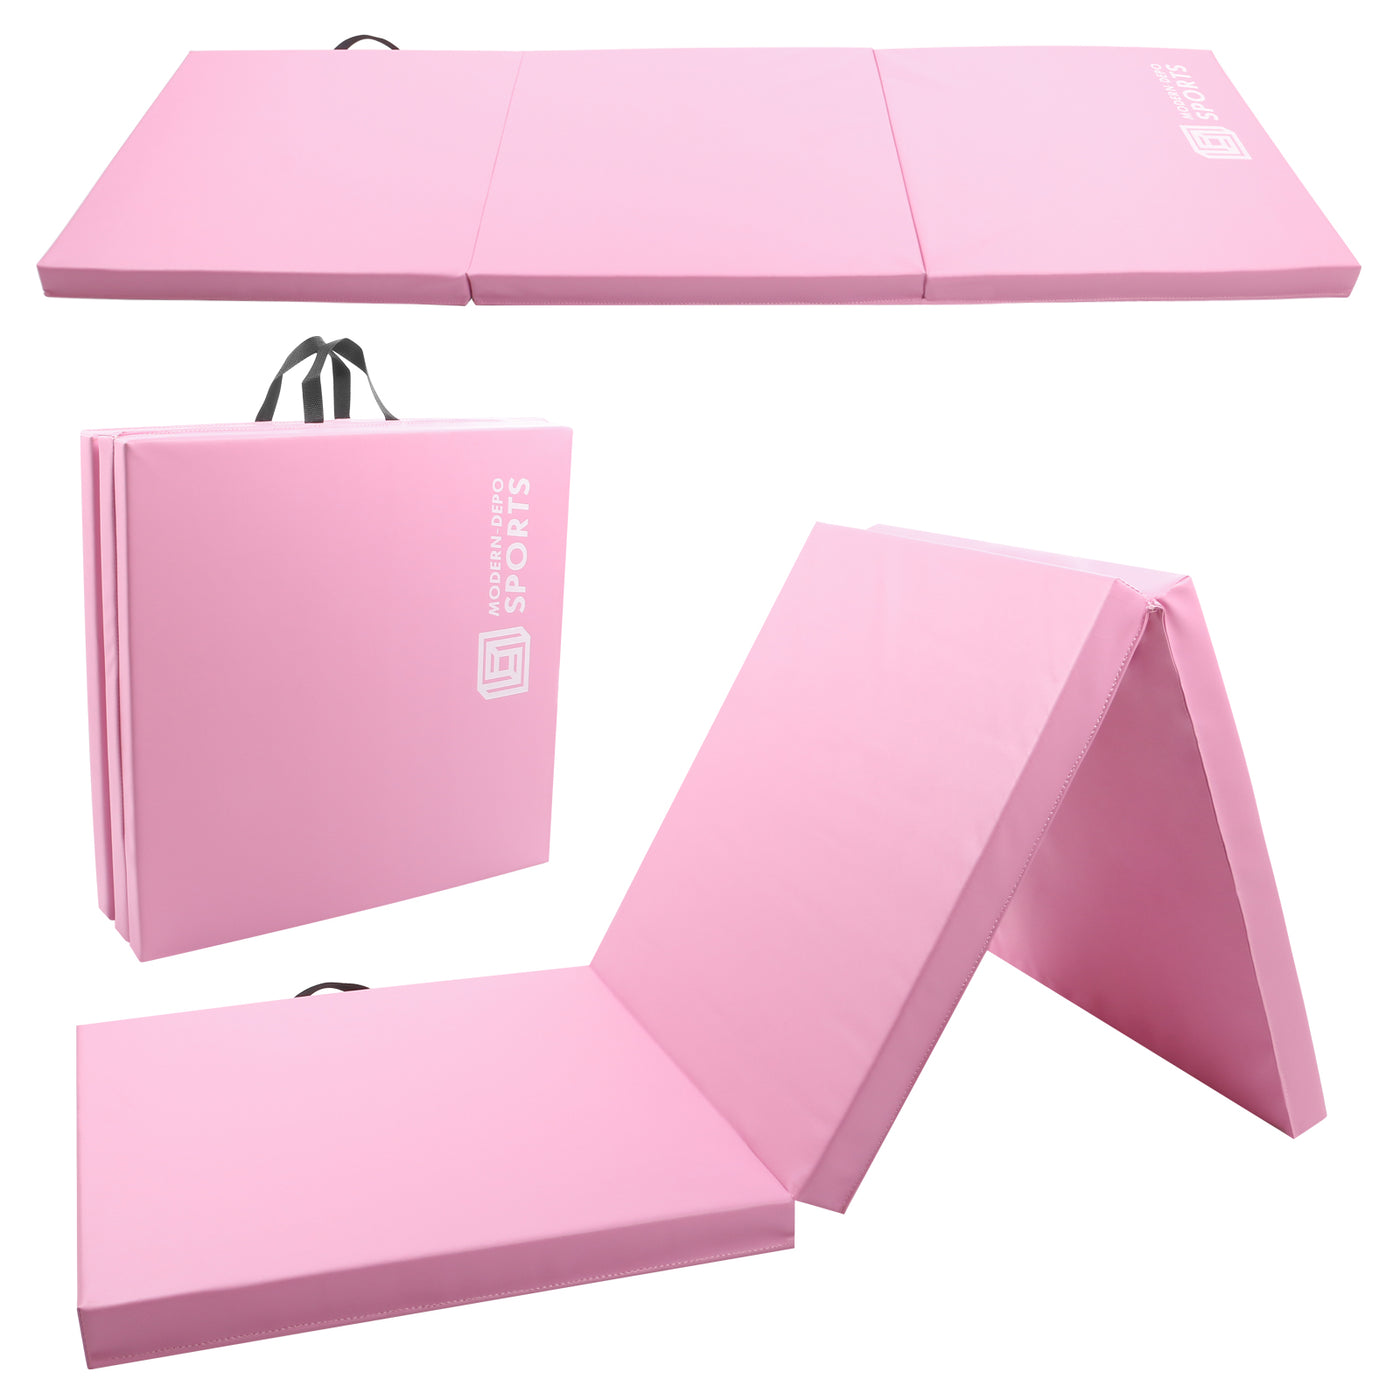 Gymnastics Mat 6'x2'x2" Foldable Tumbling Mats with Carrying Handles Three Fold Thick Exercise Mat for Home Aerobics Stretching Yoga